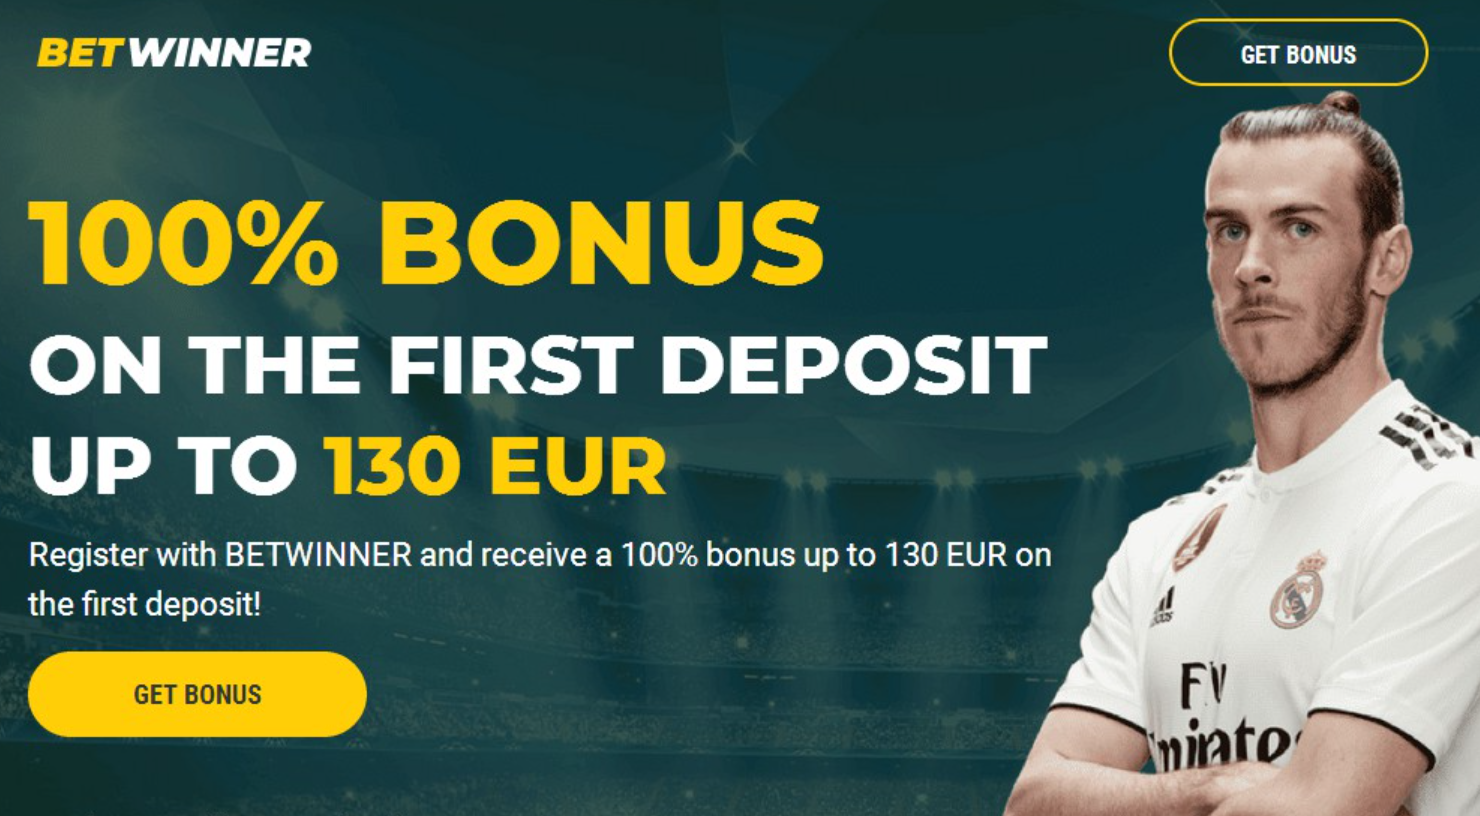 Beneficial welcome bonus for betting fans from Betwinner